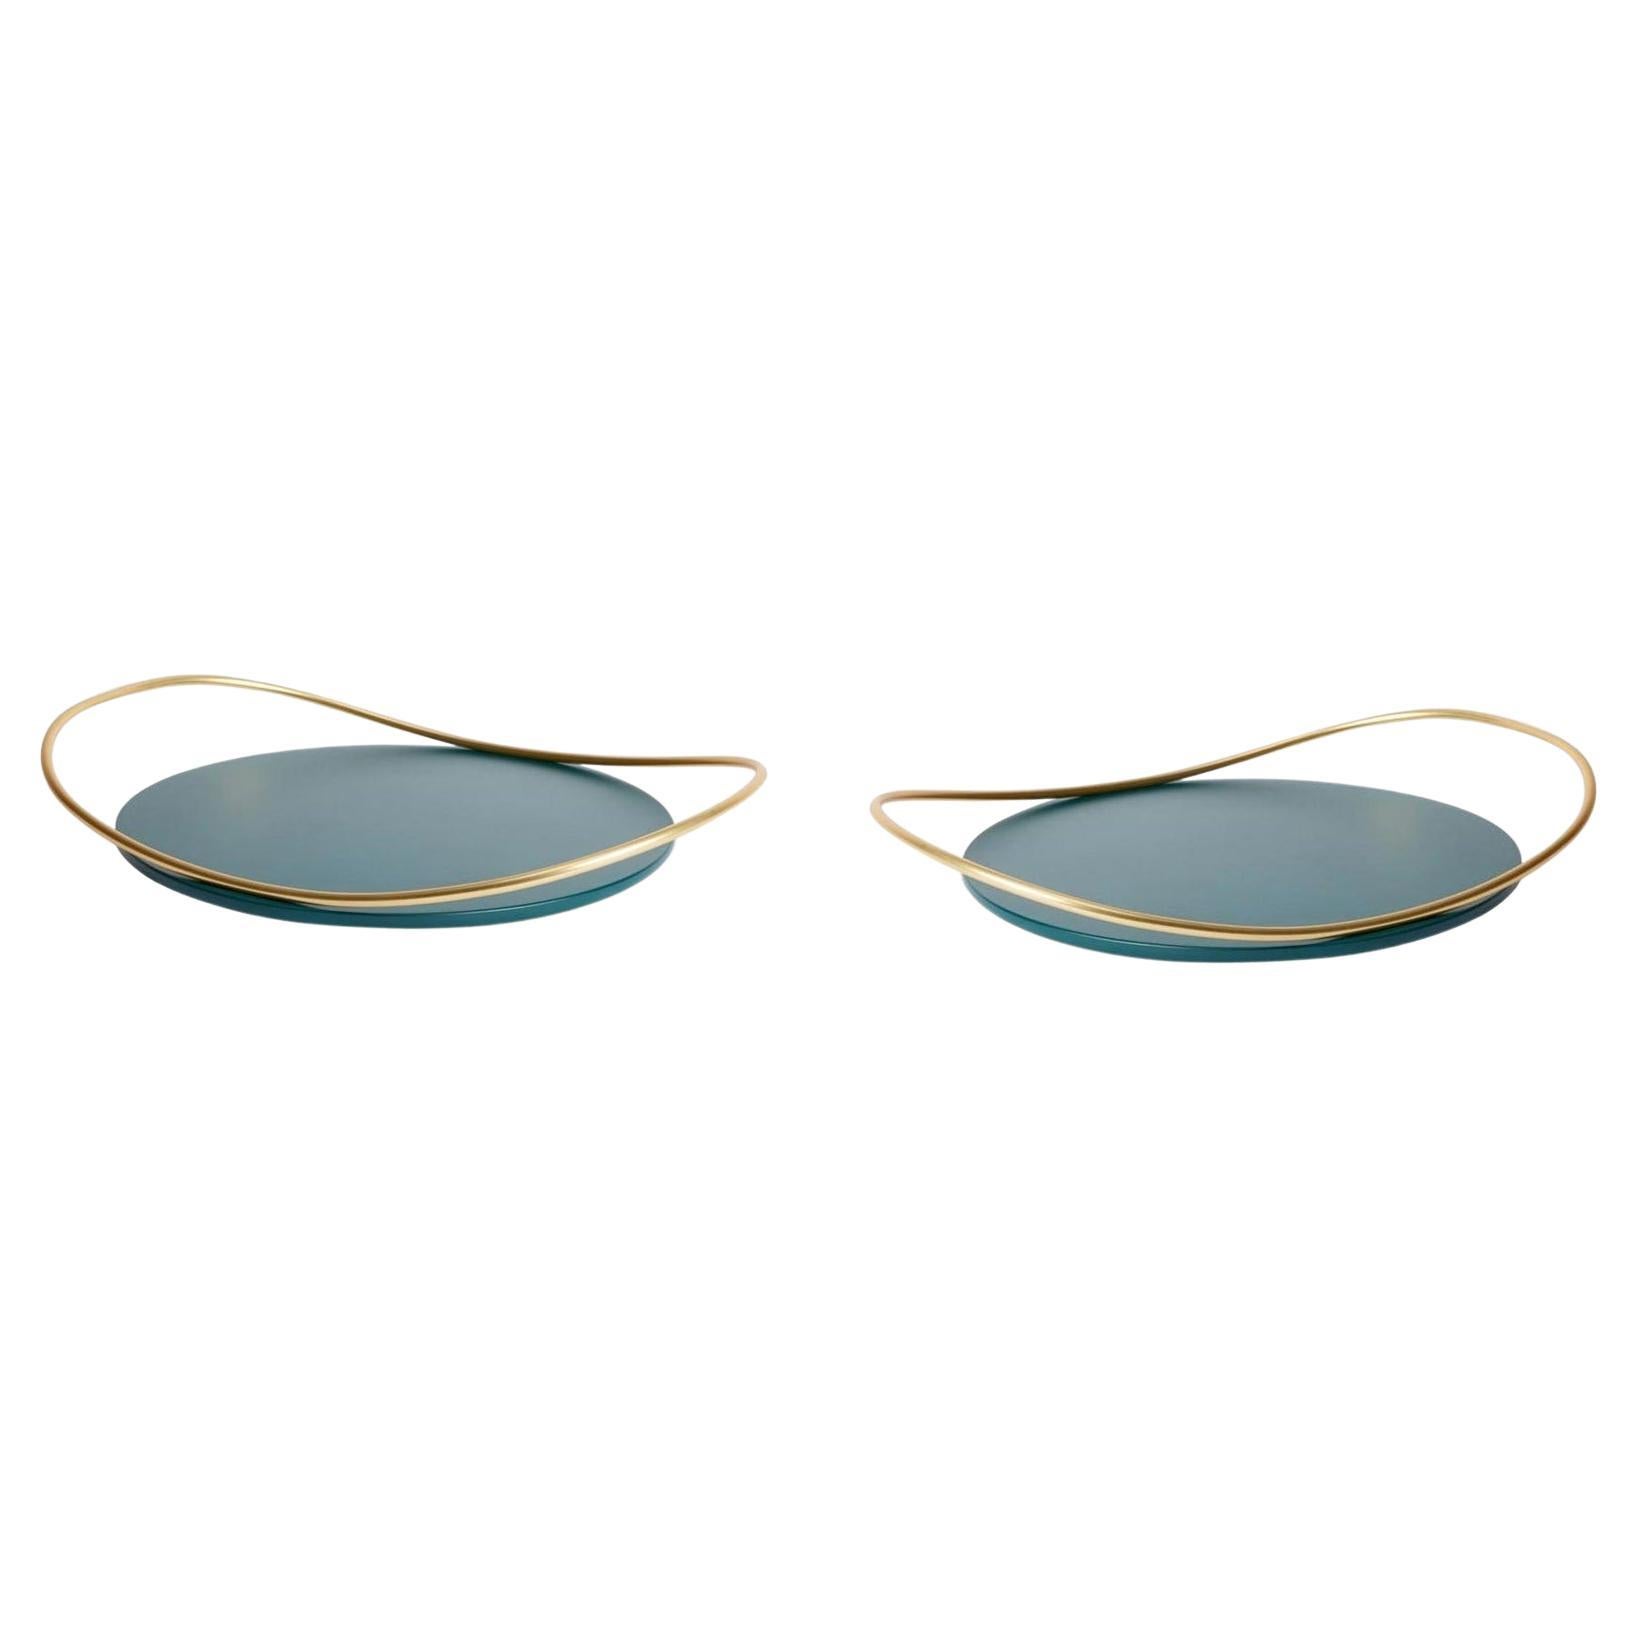 Pair of Petrol Green Touché B Trays by Mason Editions For Sale